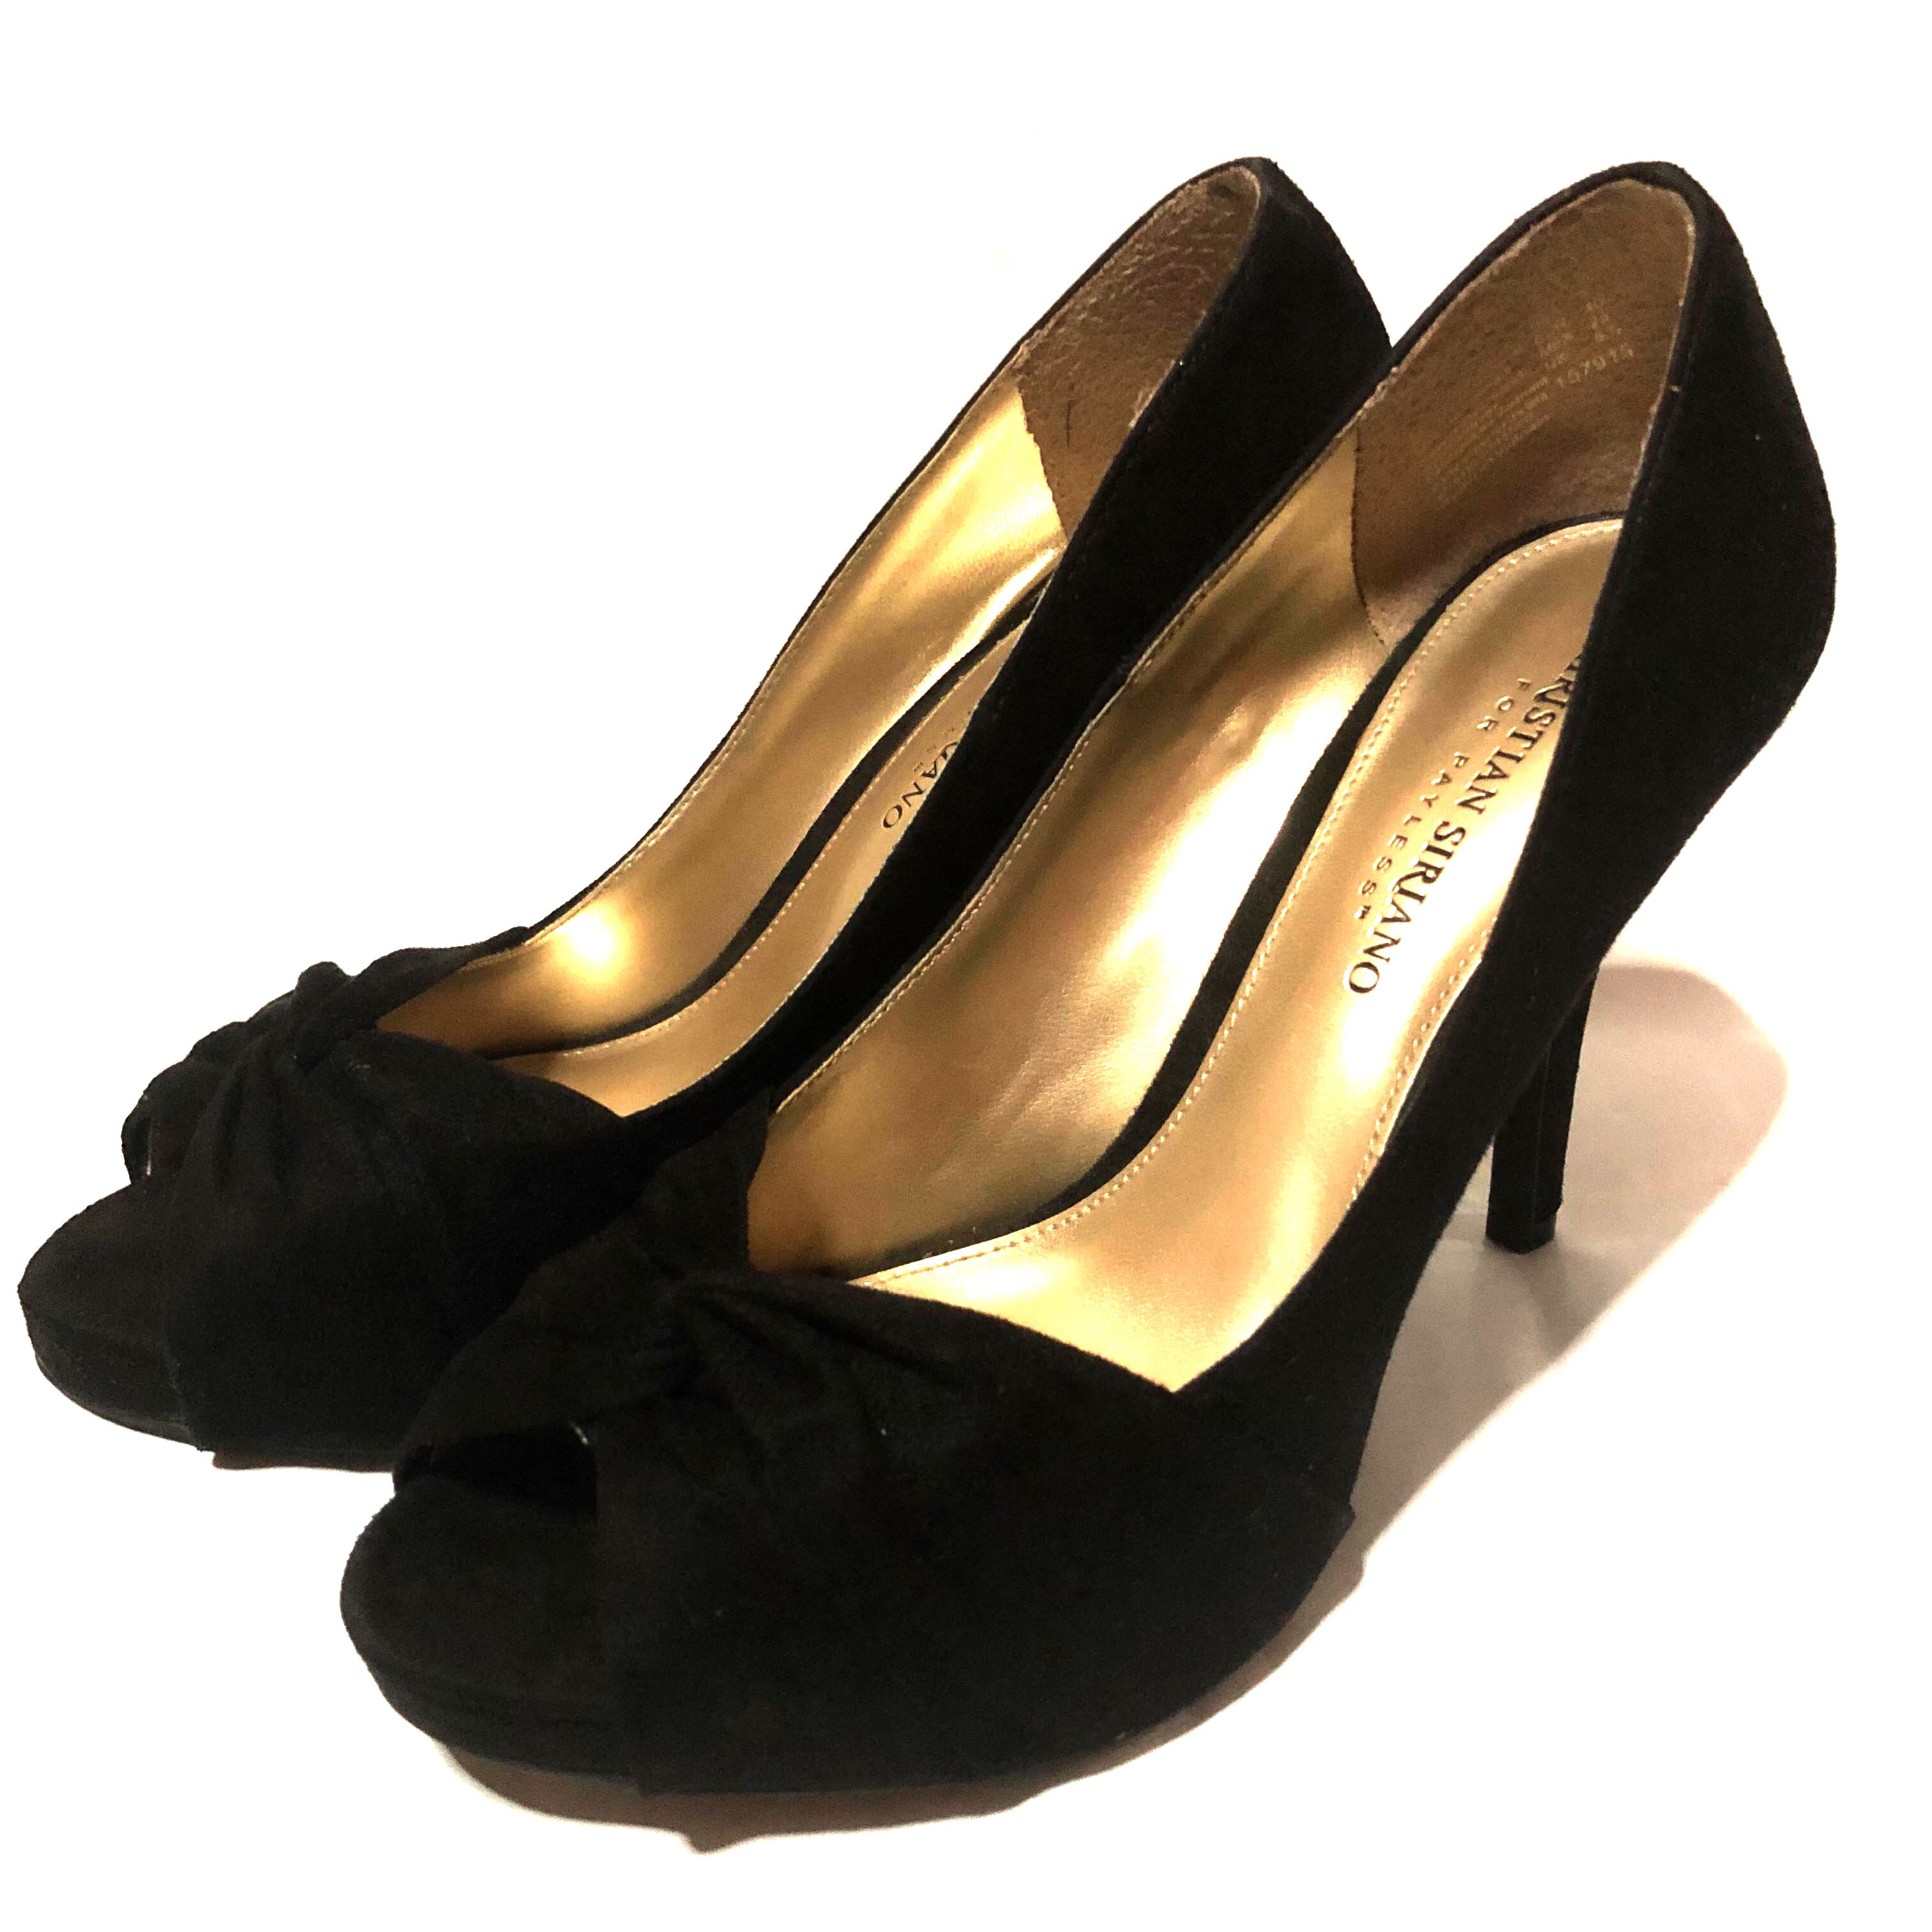 christian siriano for payless black heels